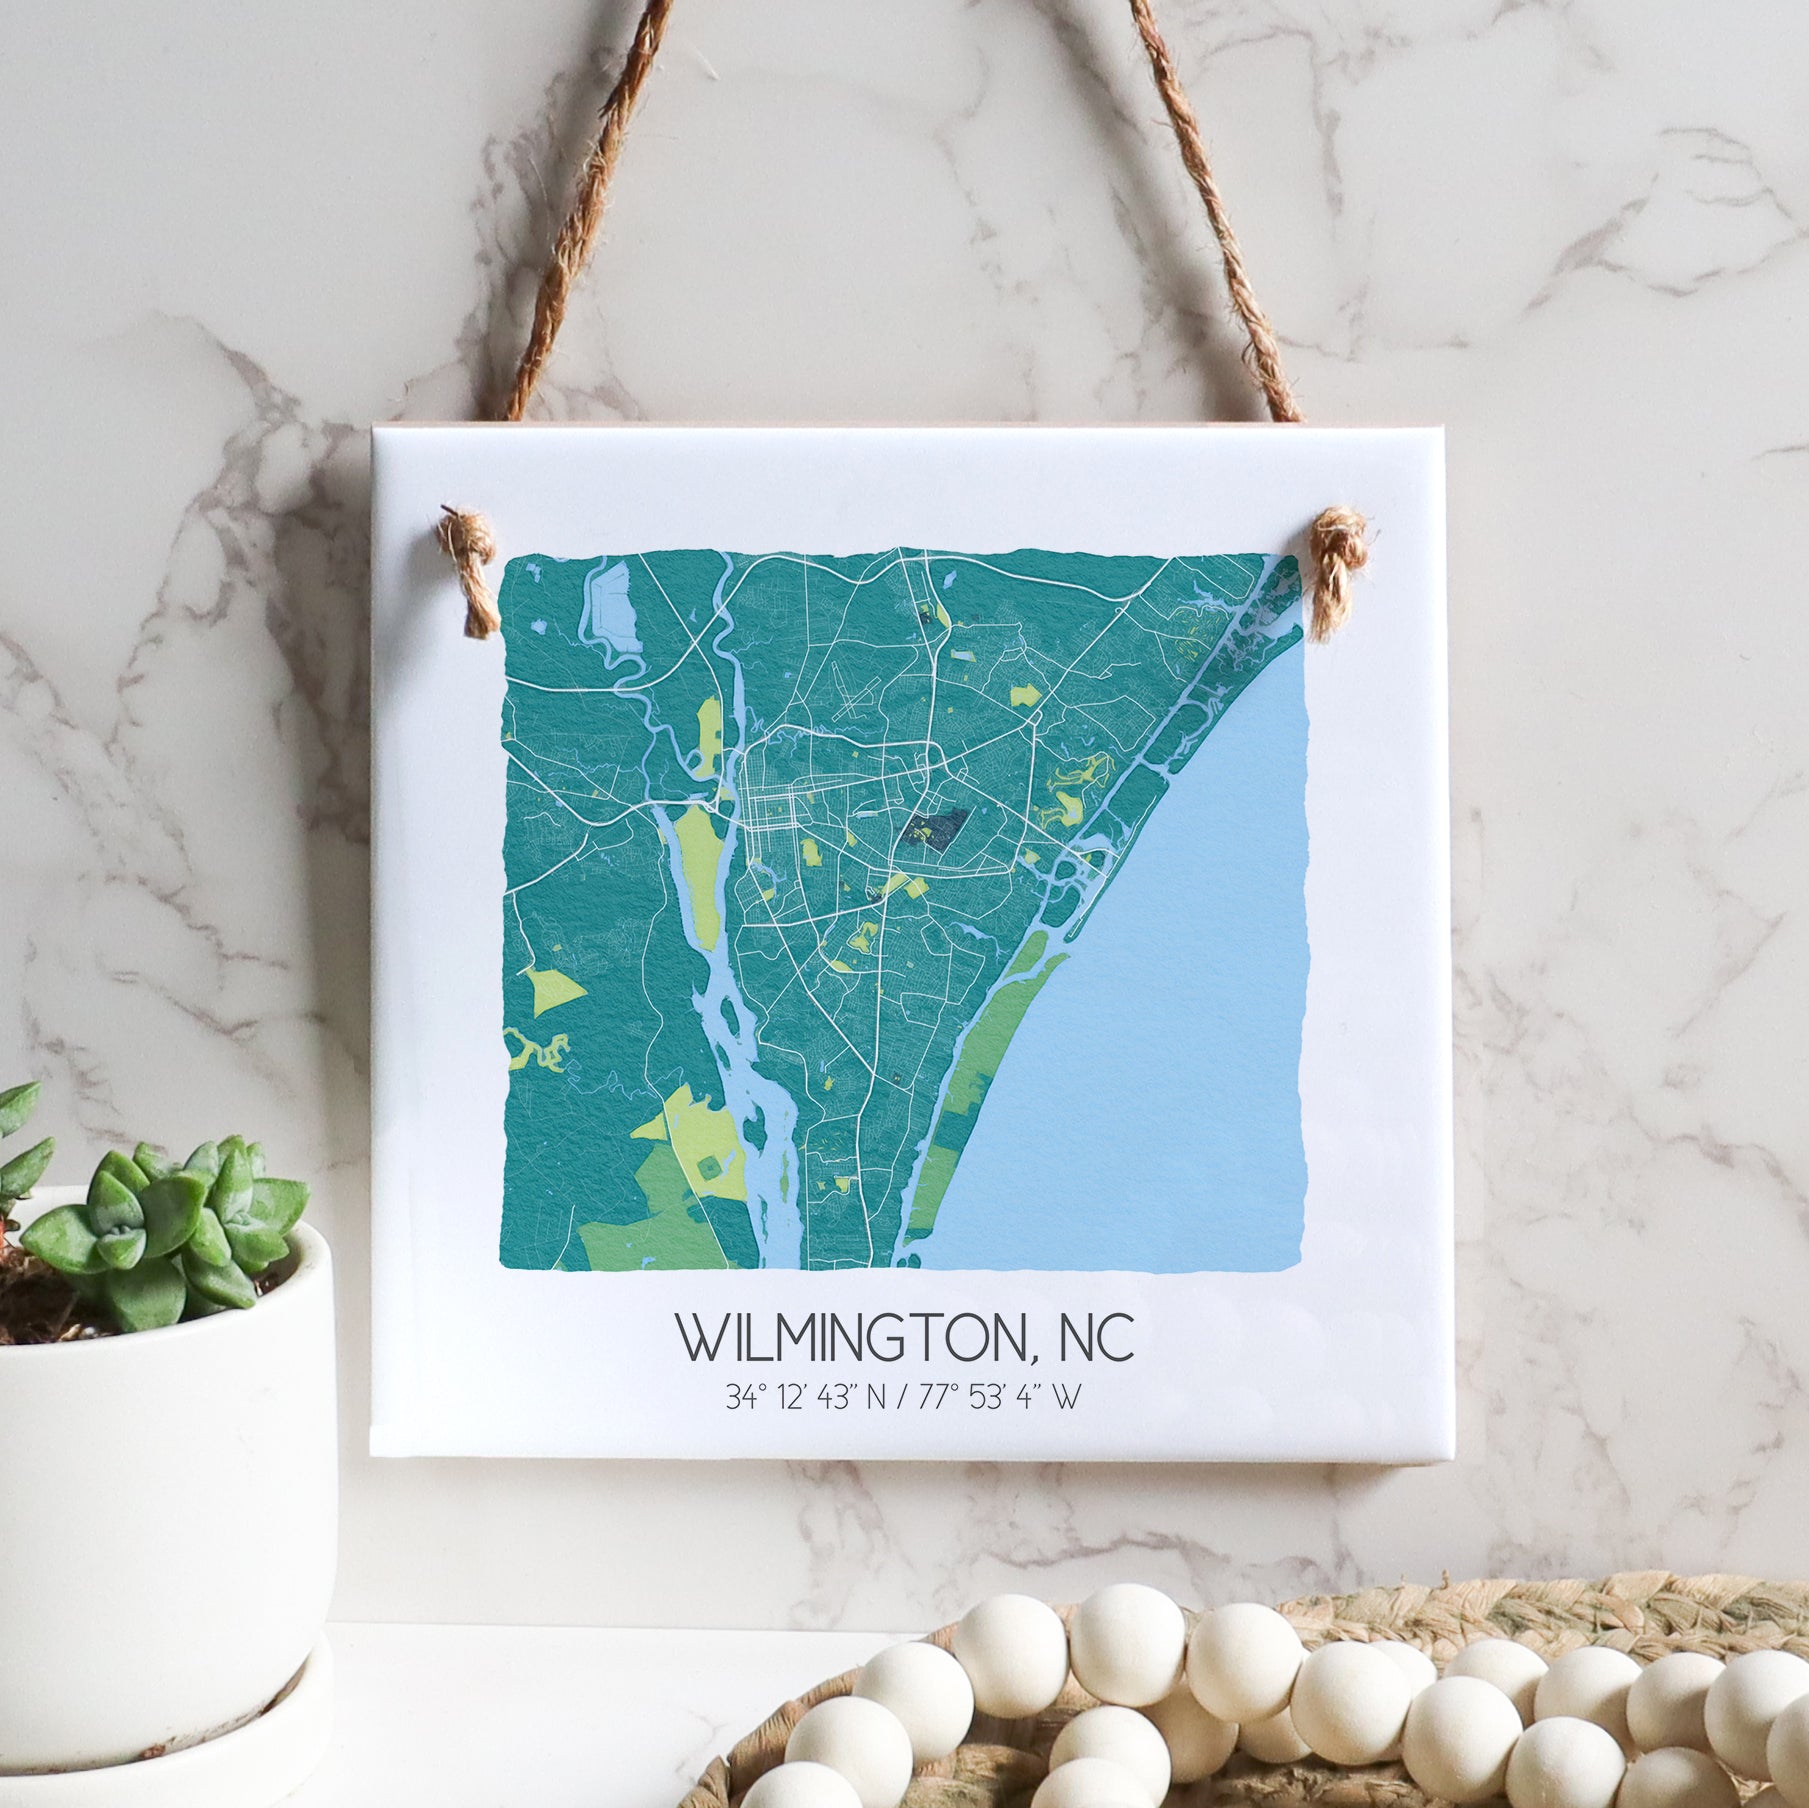 A city map of Wilmington North Carolina on a square ceramic tile sign hanging on a wall, in the color teal